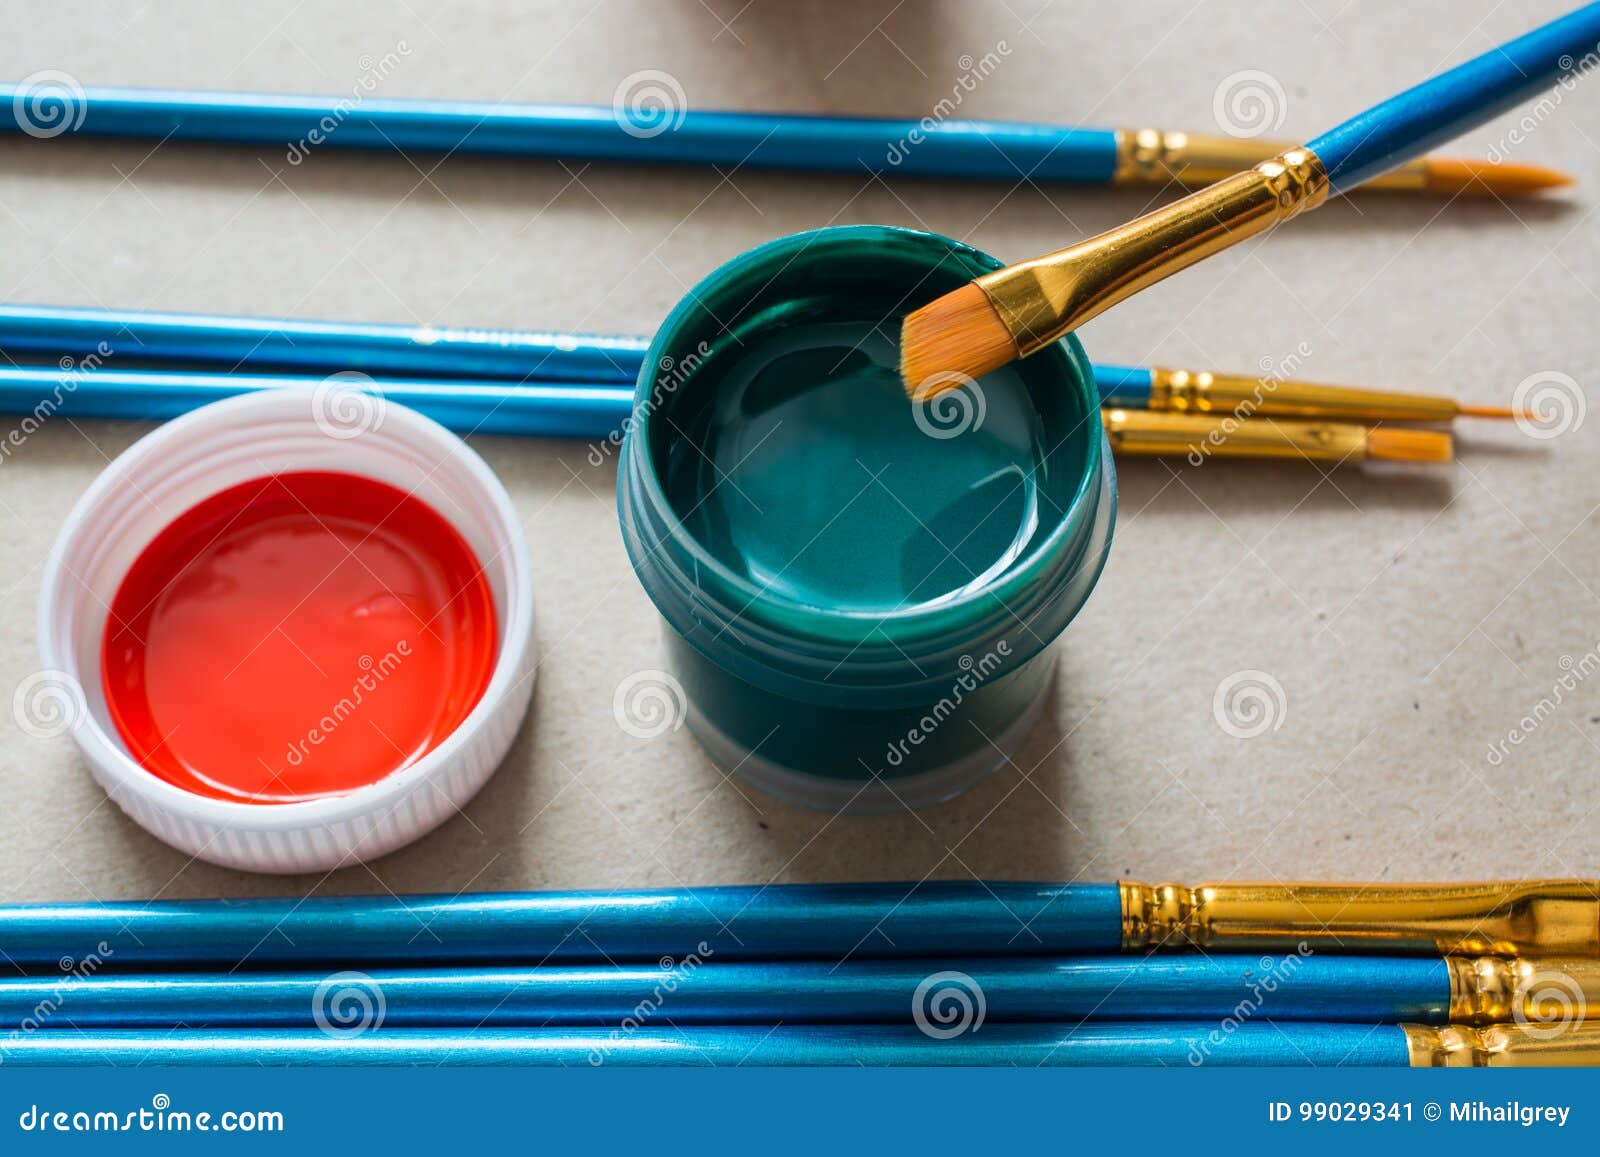 Opened Gouache Paint Buckets with Brush. Stock Image - Image of multi ...